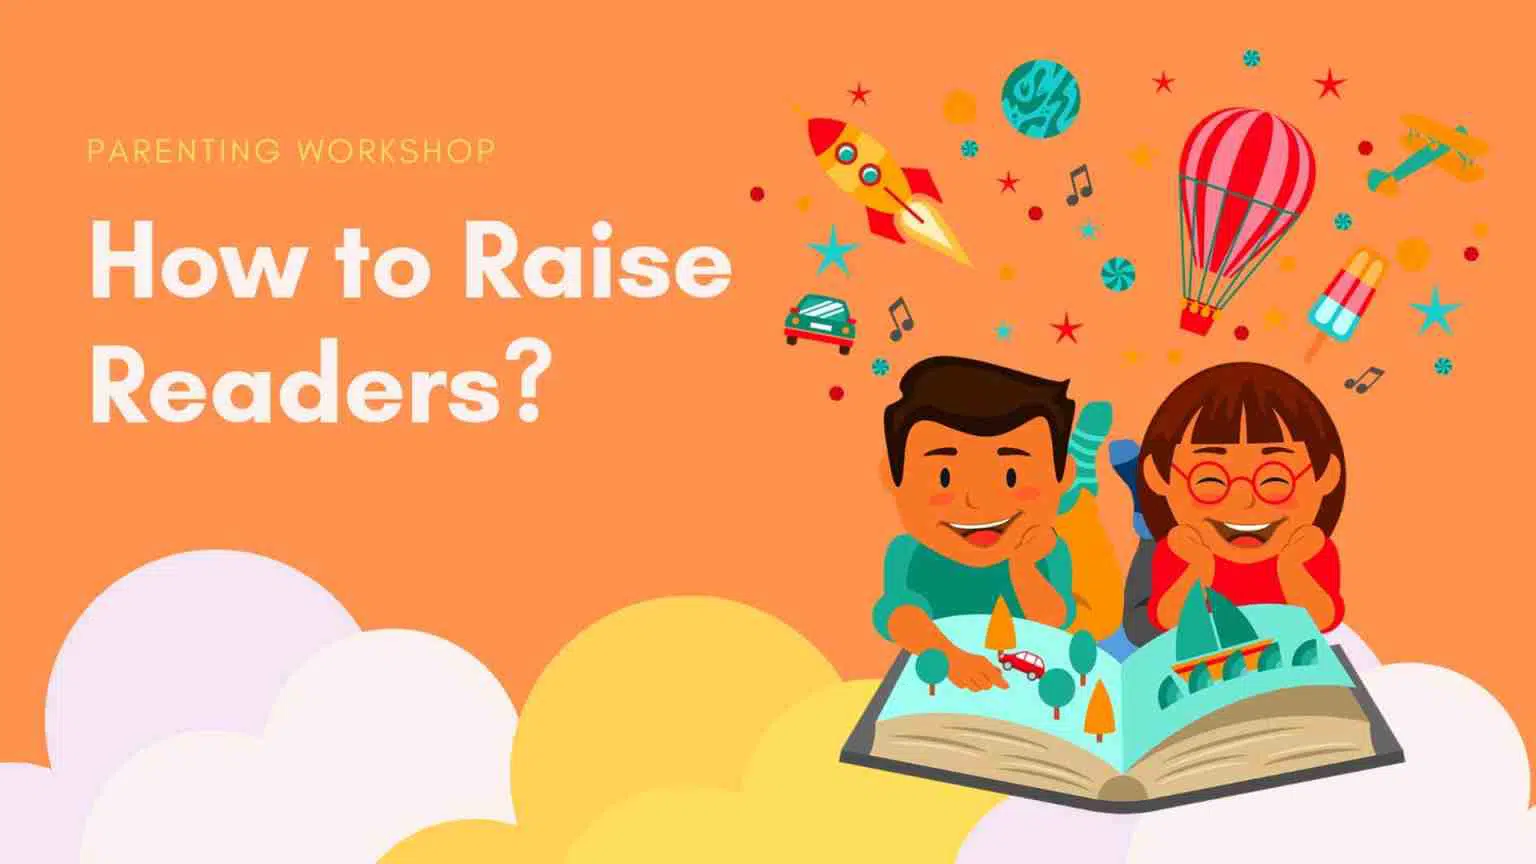 How to Raise Readers?